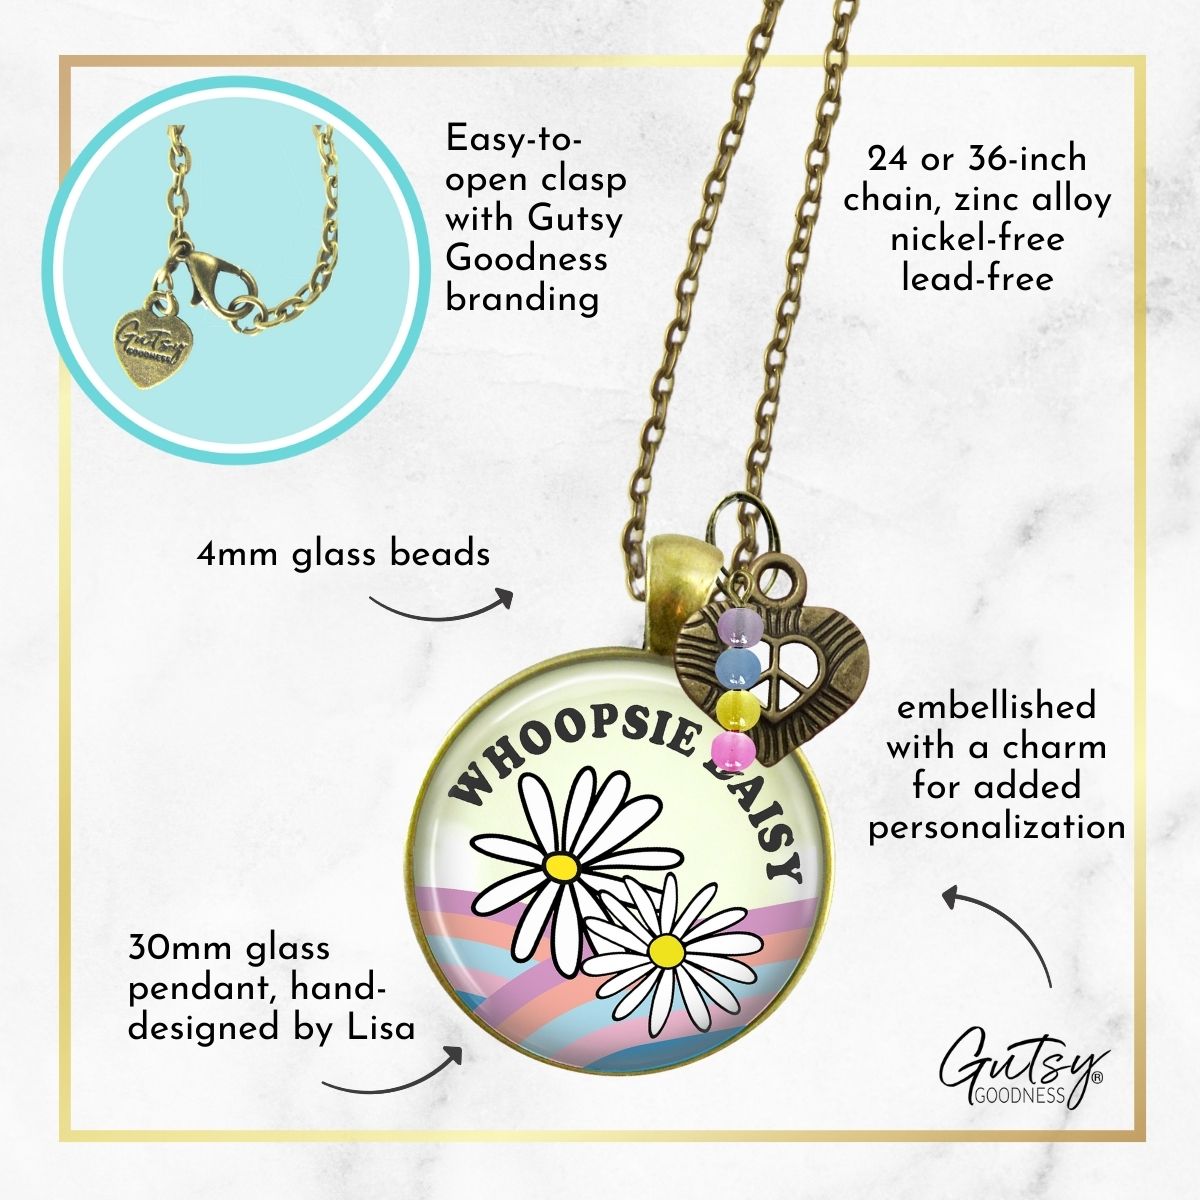 Handmade Gutsy Goodness Jewelry Counting My Blessings Under The Neon Moon Necklace Southwest Boho Style Charm Jewelry & Message Card